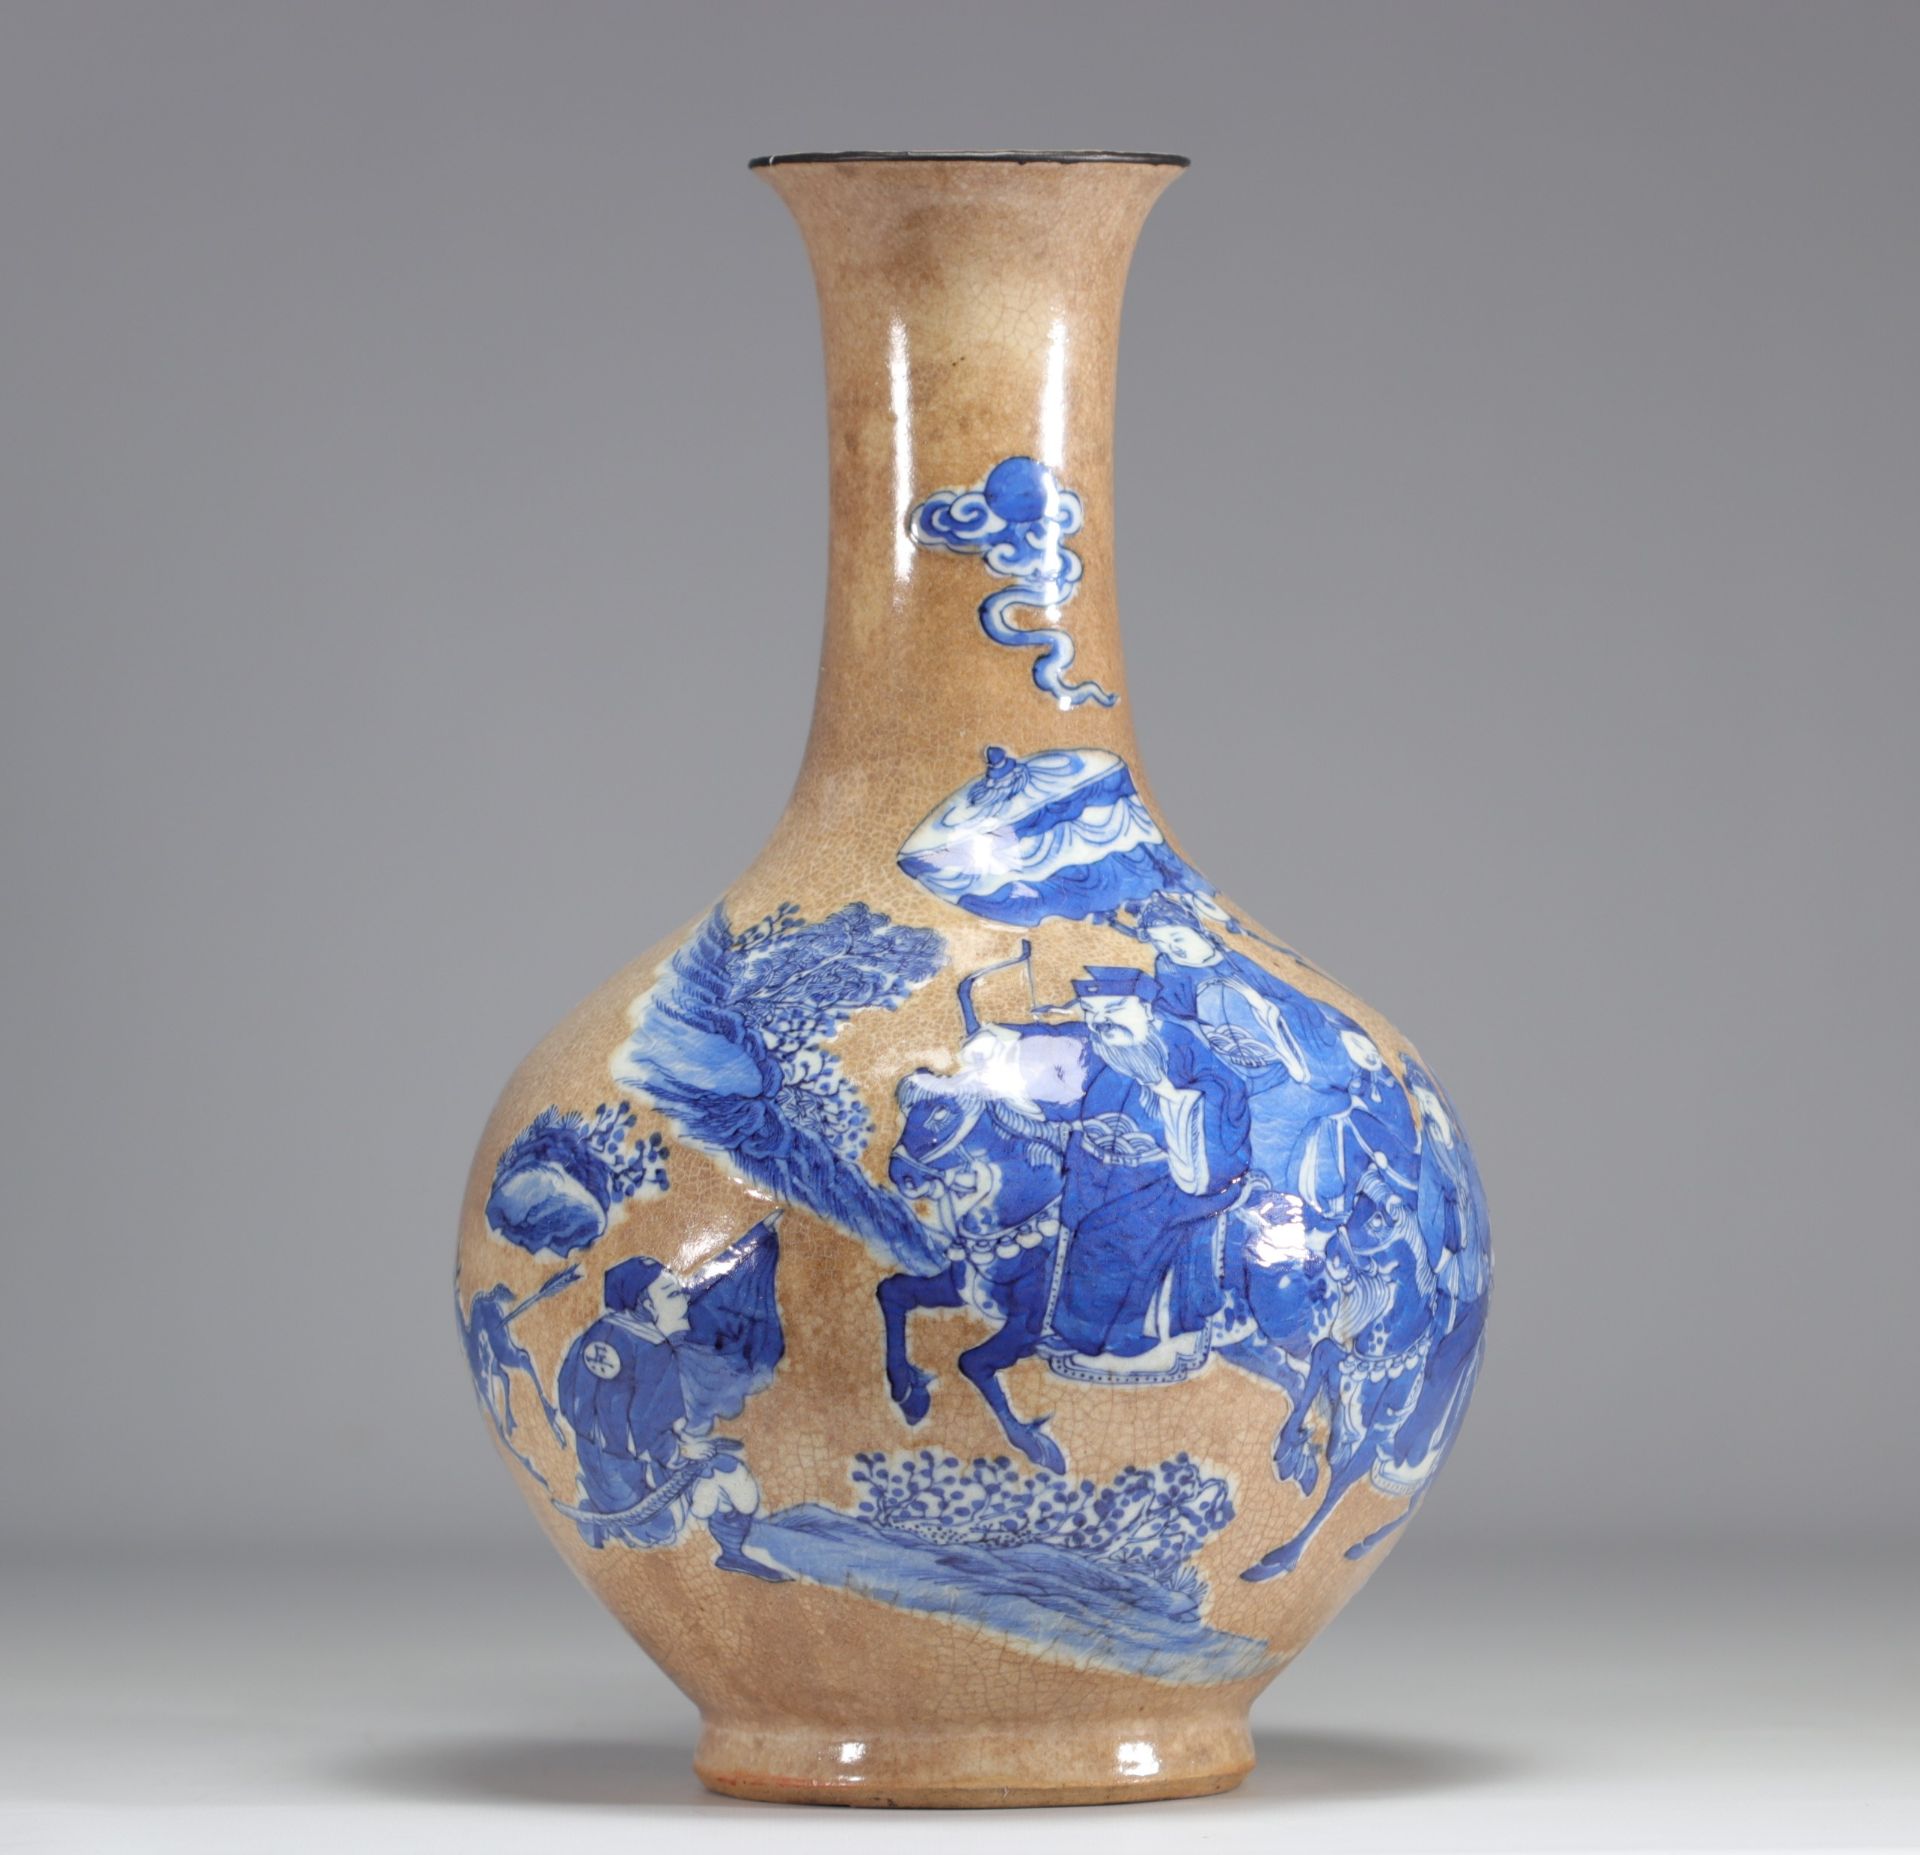 Chinese porcelain vase "Nankin" decorated with a deer hunt on a cracked white background - Image 3 of 5